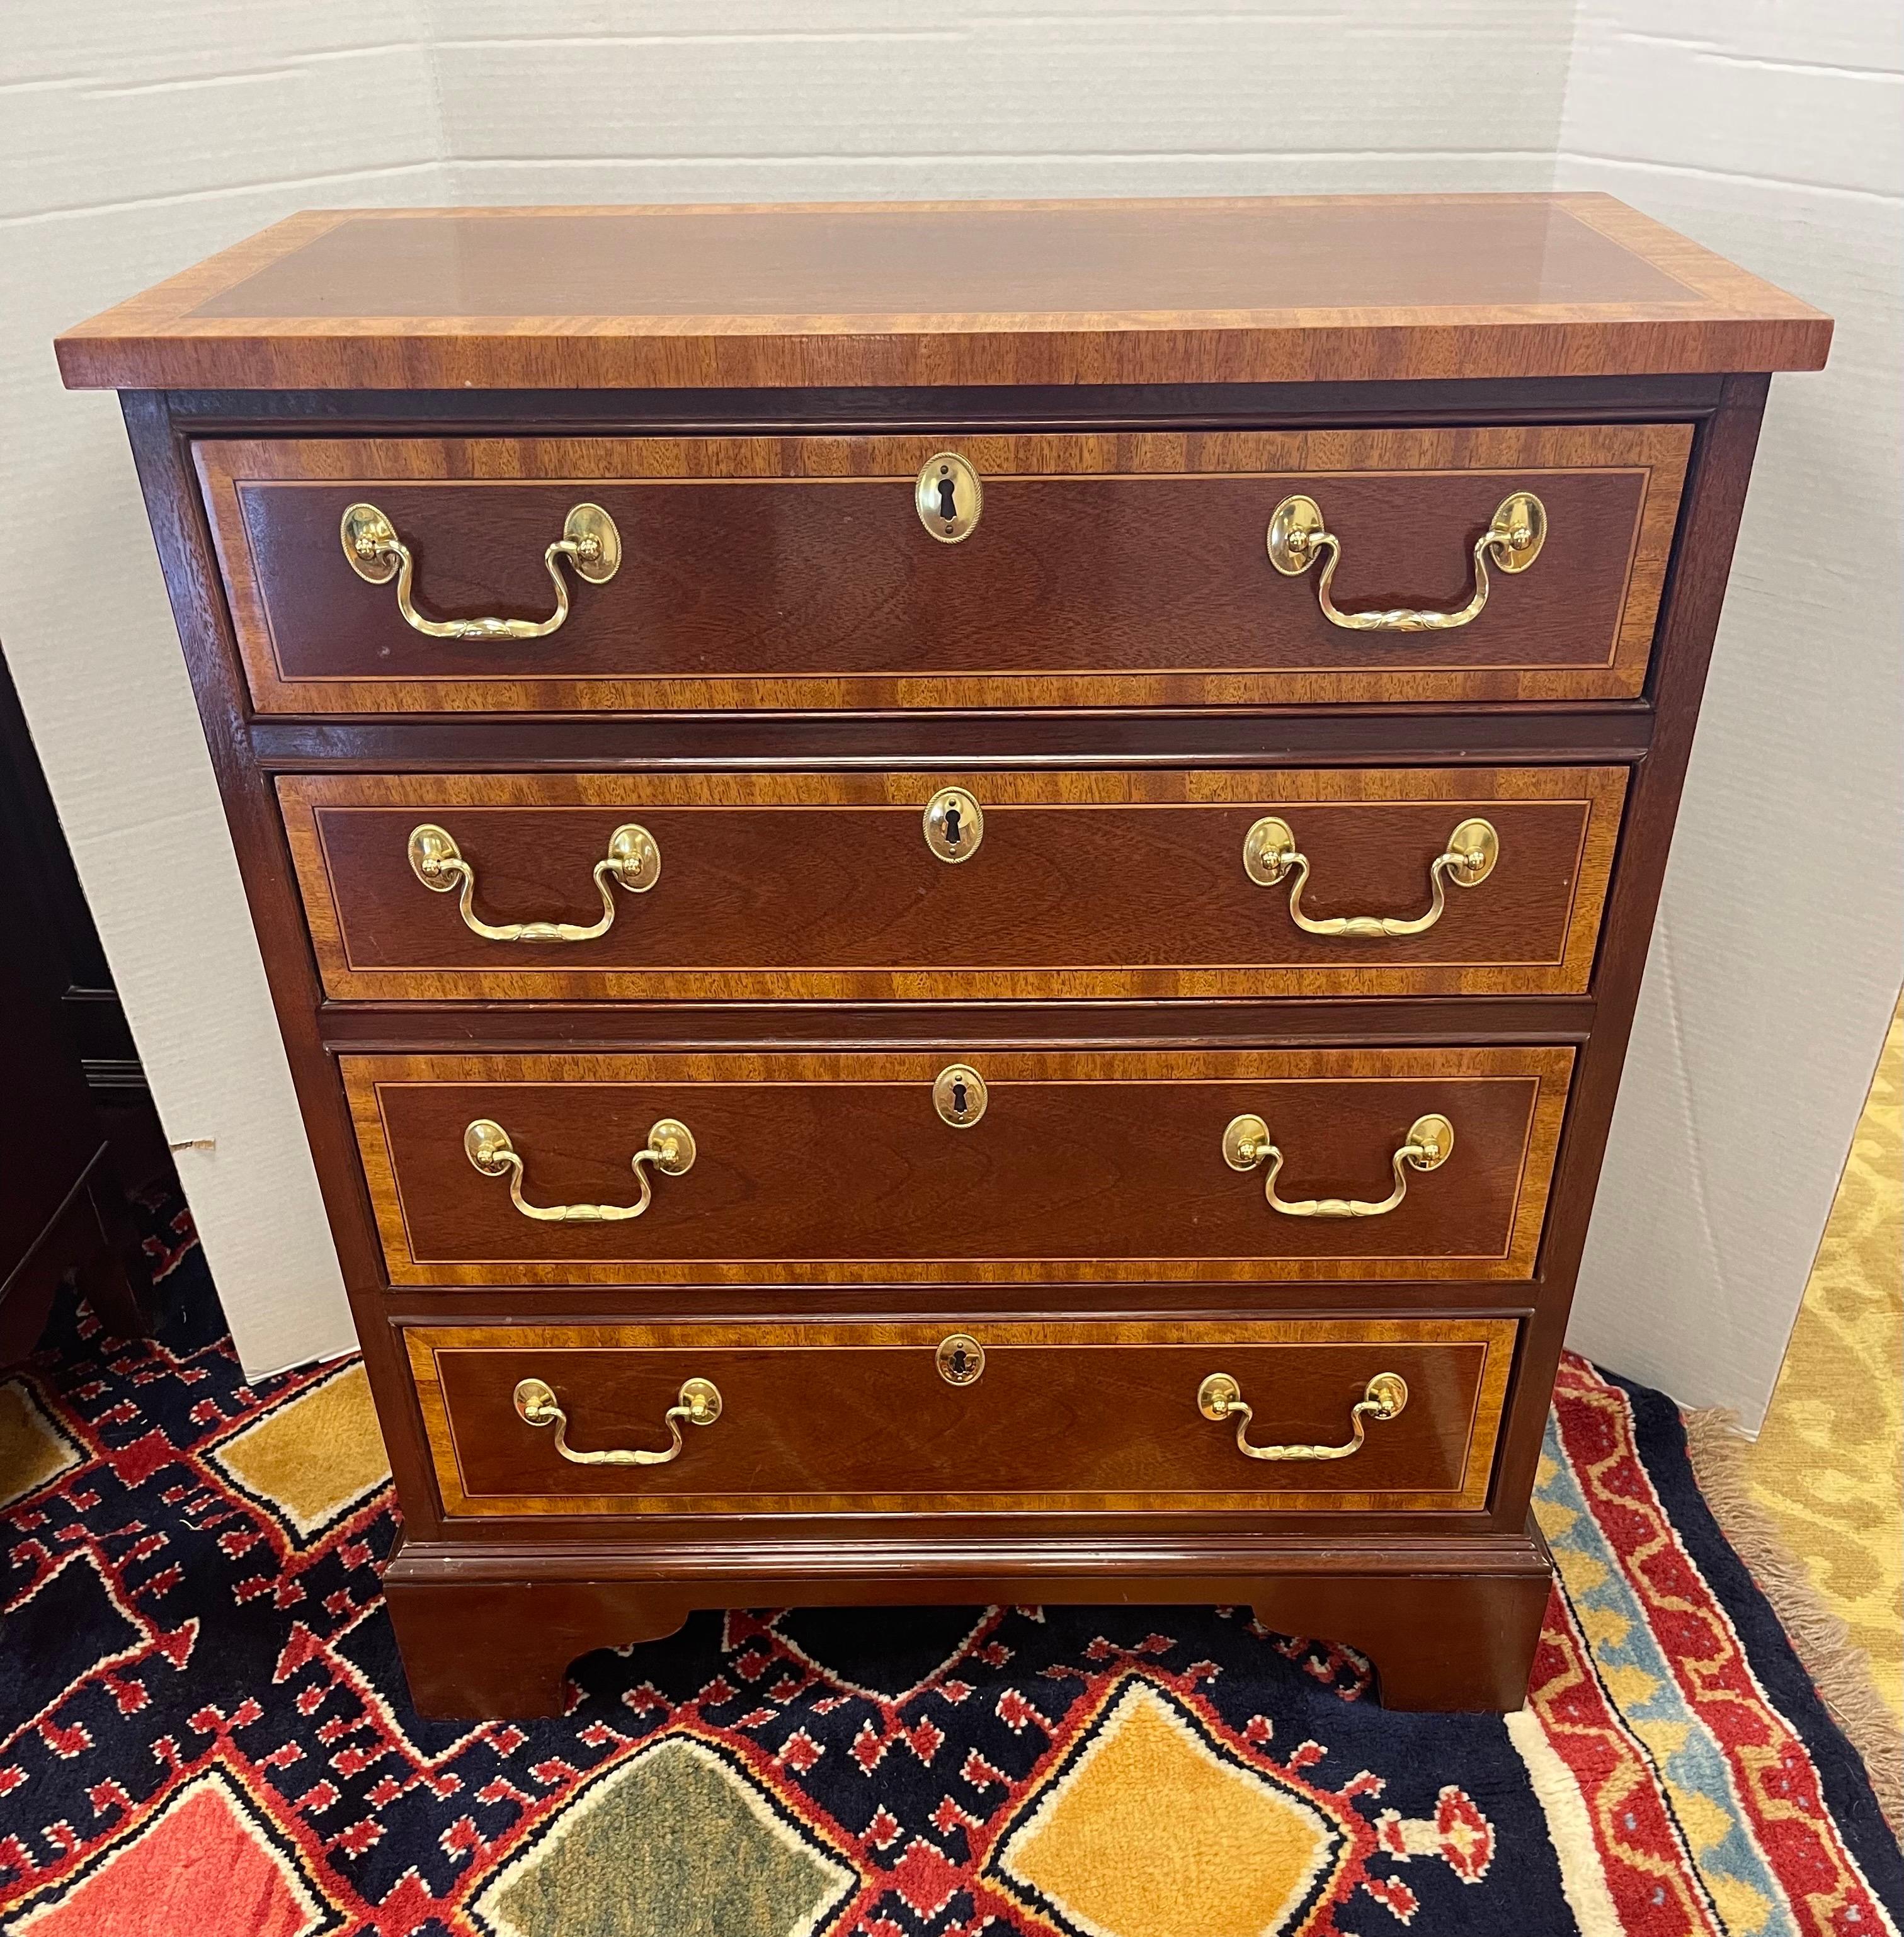 Elegant signed Councill Furniture, made in USA, federal bachelors' chest.
Gorgeous inlay mahogany throughout. Four drawers in total. Why not own the good stuff?